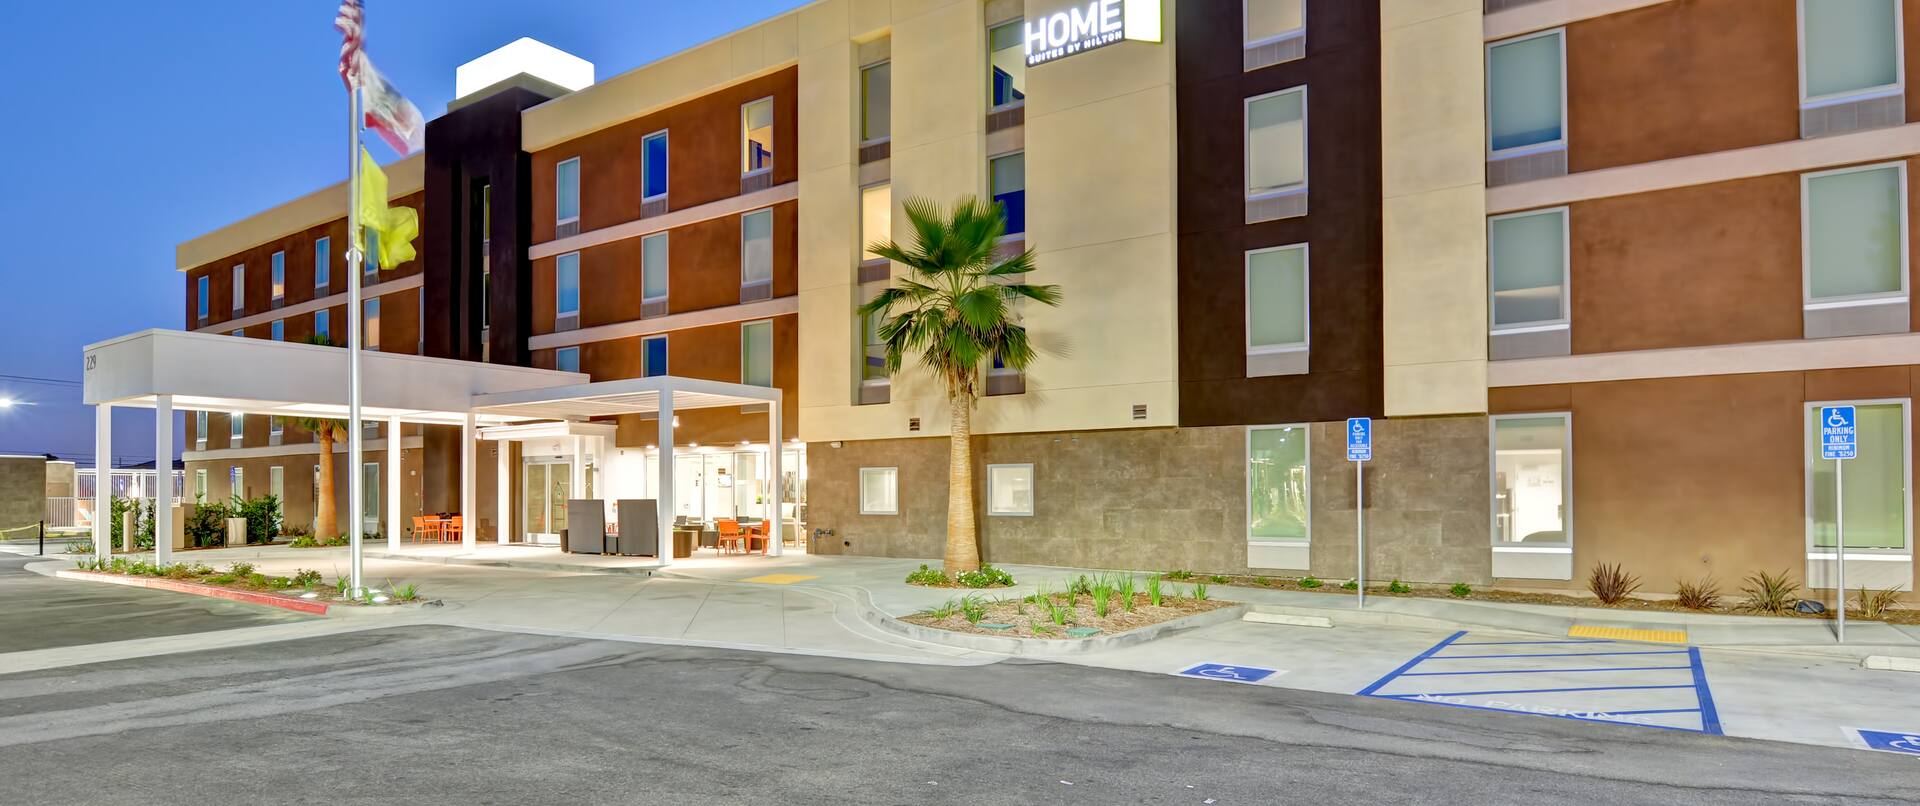 Home2 Suites by Hilton Azusa Hotel, CA - Hotel Exterior at Dusk